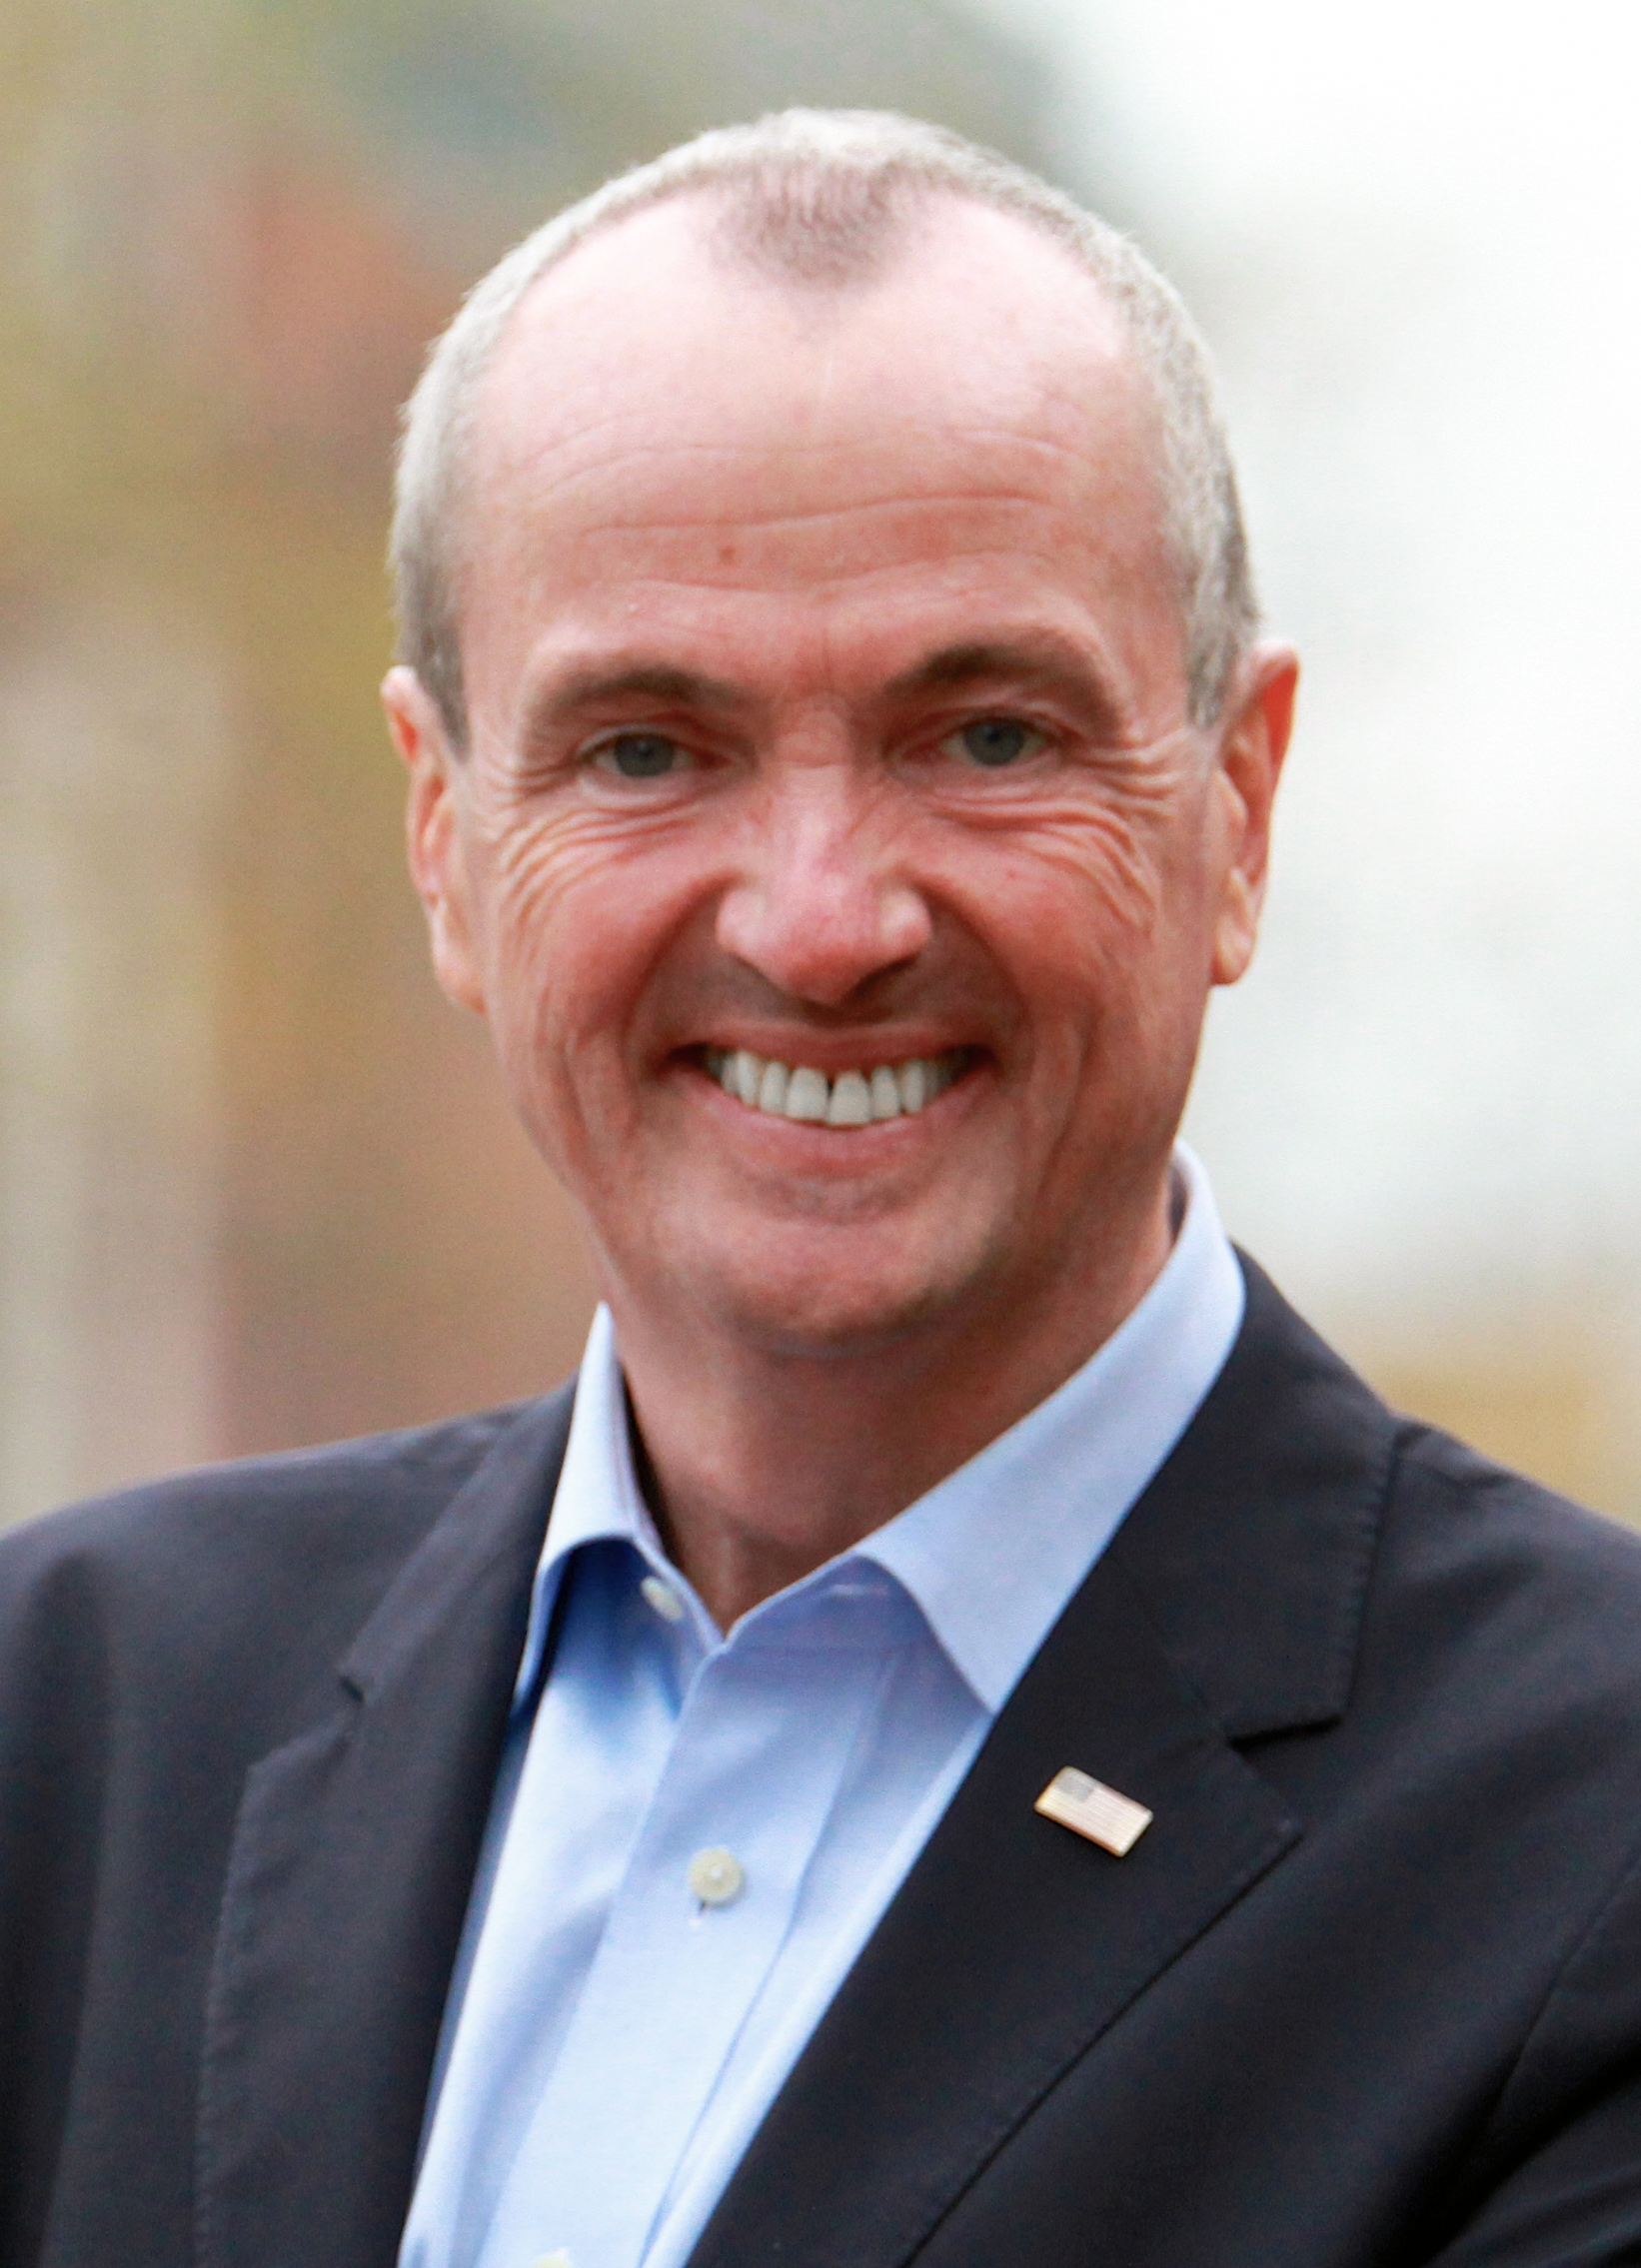 Phil_Murphy_for_Governor_(cropped_2).jpg